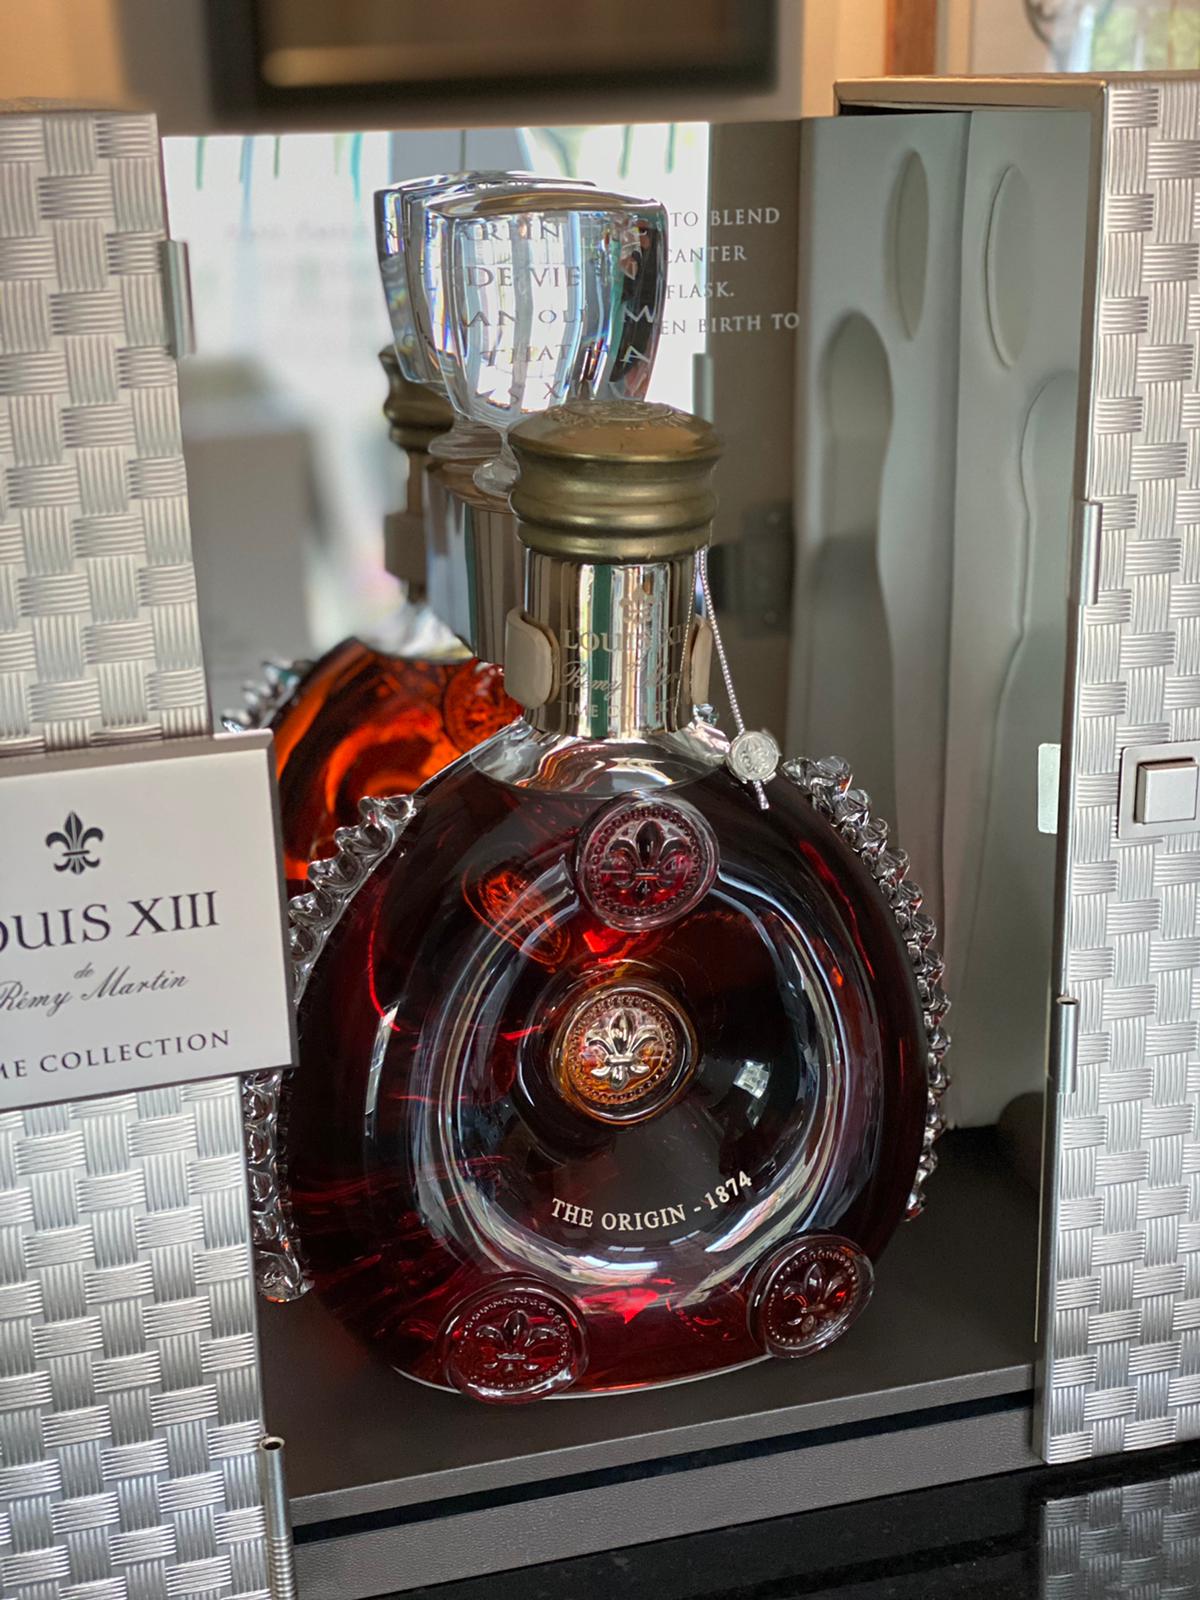 Rémy Martin Louis XIII 1874 - Time Collection First Release